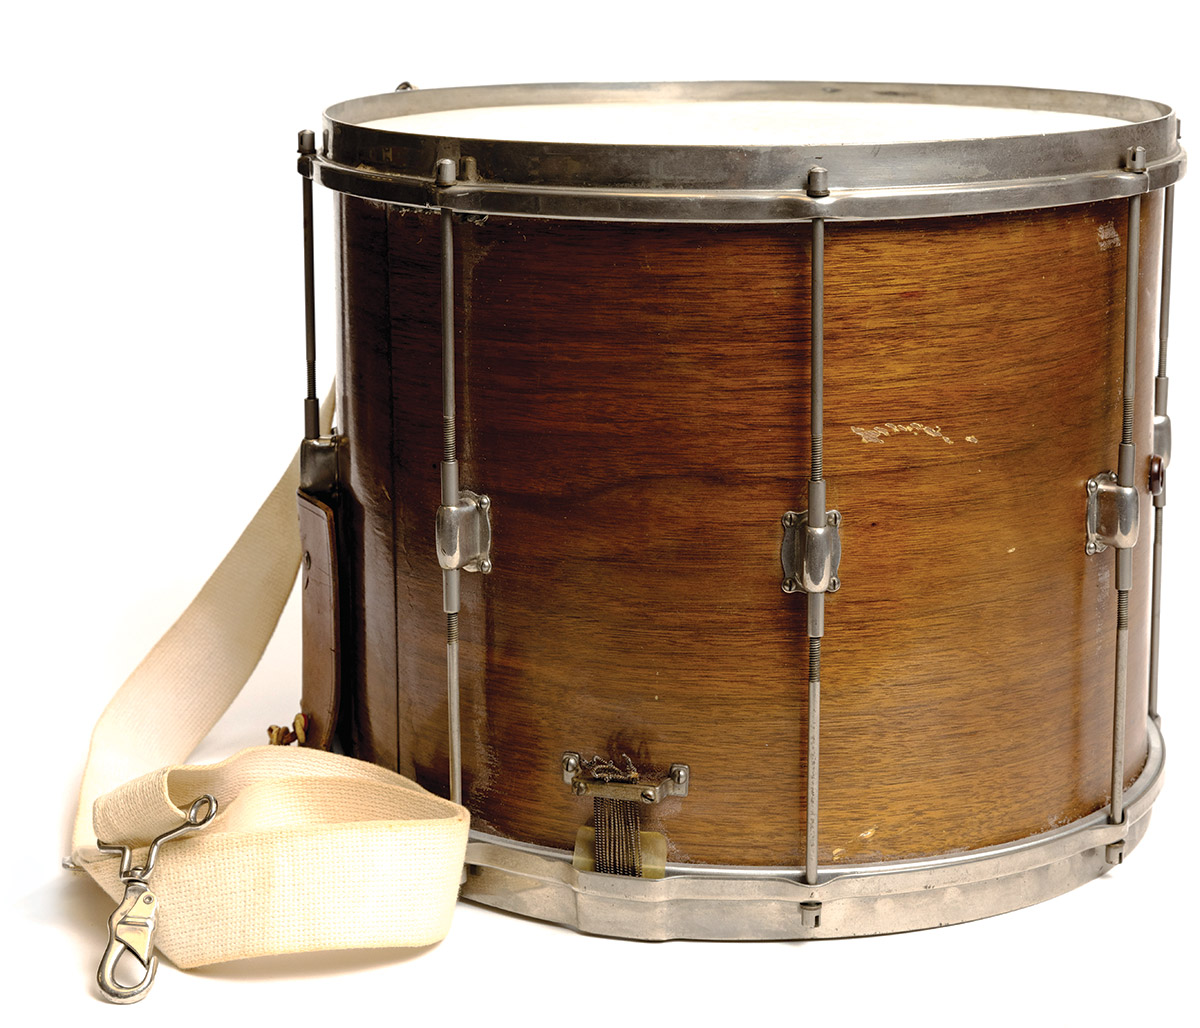 An old snare drum has wooden shell stained a dark golden brown, a white drum head and silver-colored rims and wires connecting top to bottom. An off-white strap shows how the drummer carried it.